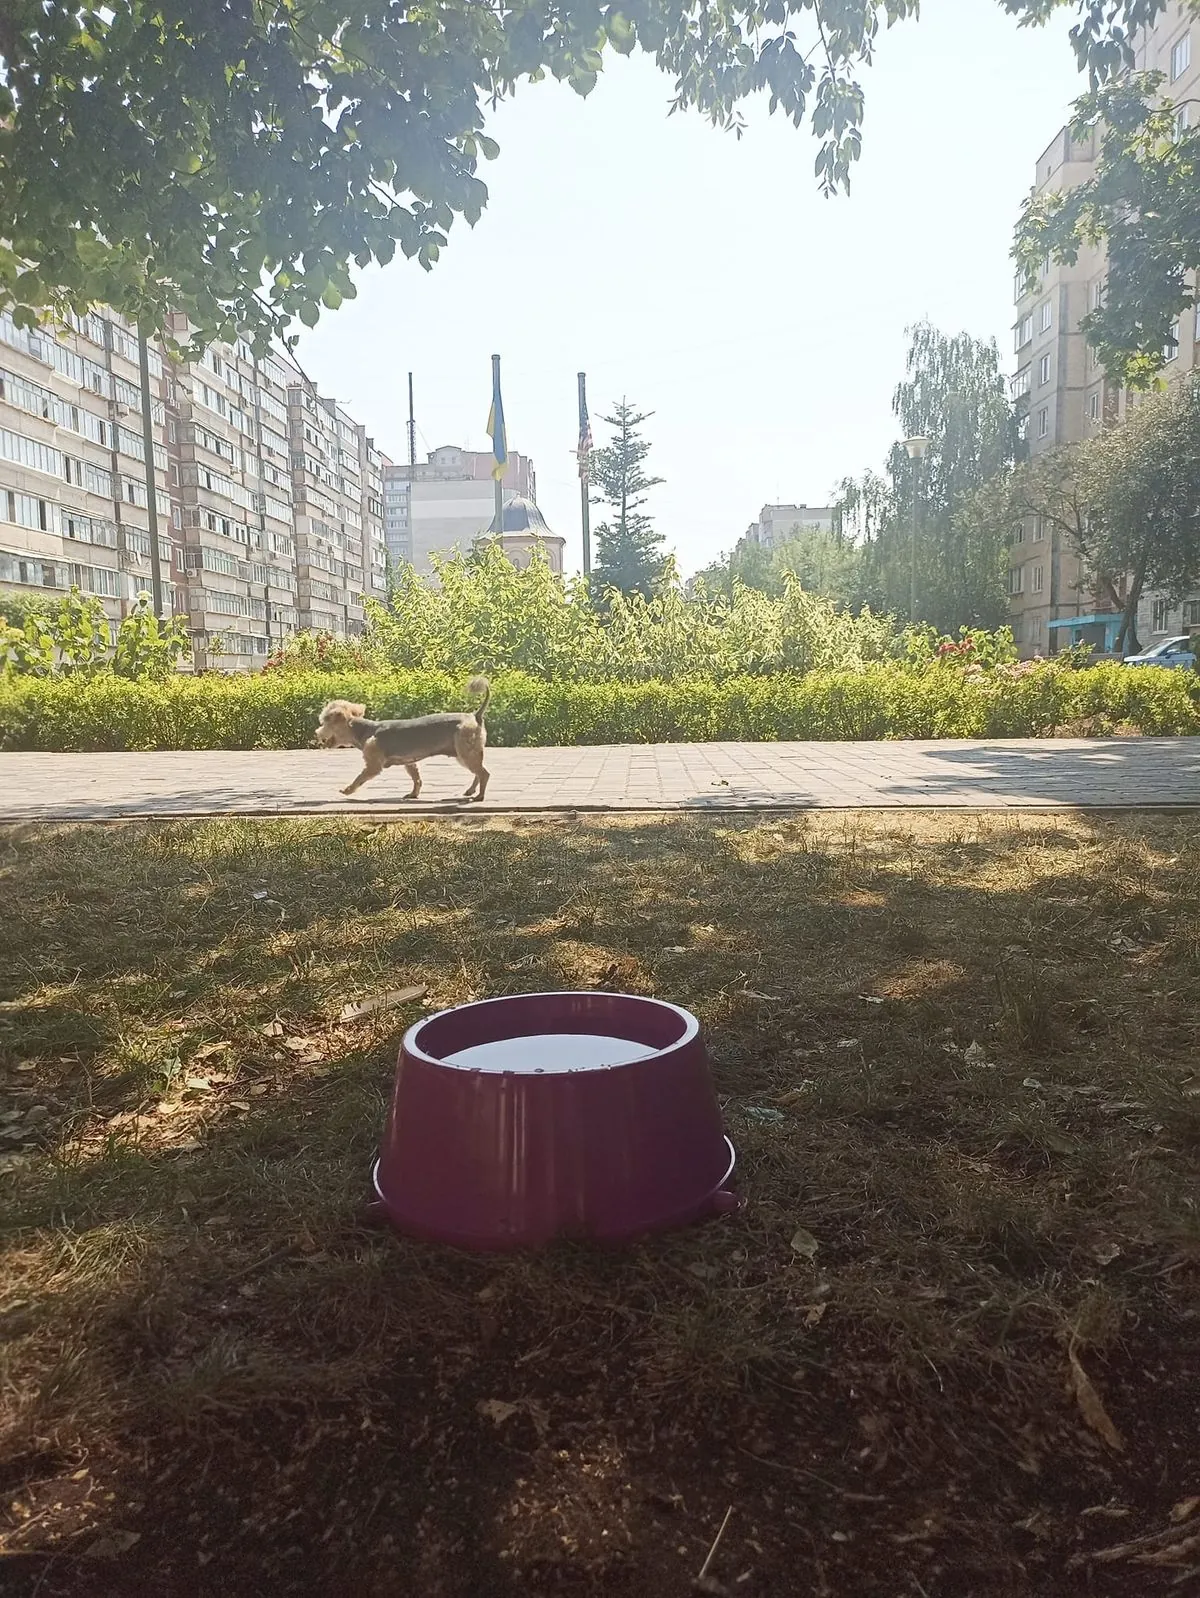 saving-from-the-heat-water-bowls-for-animals-in-brovary-parks-and-squares